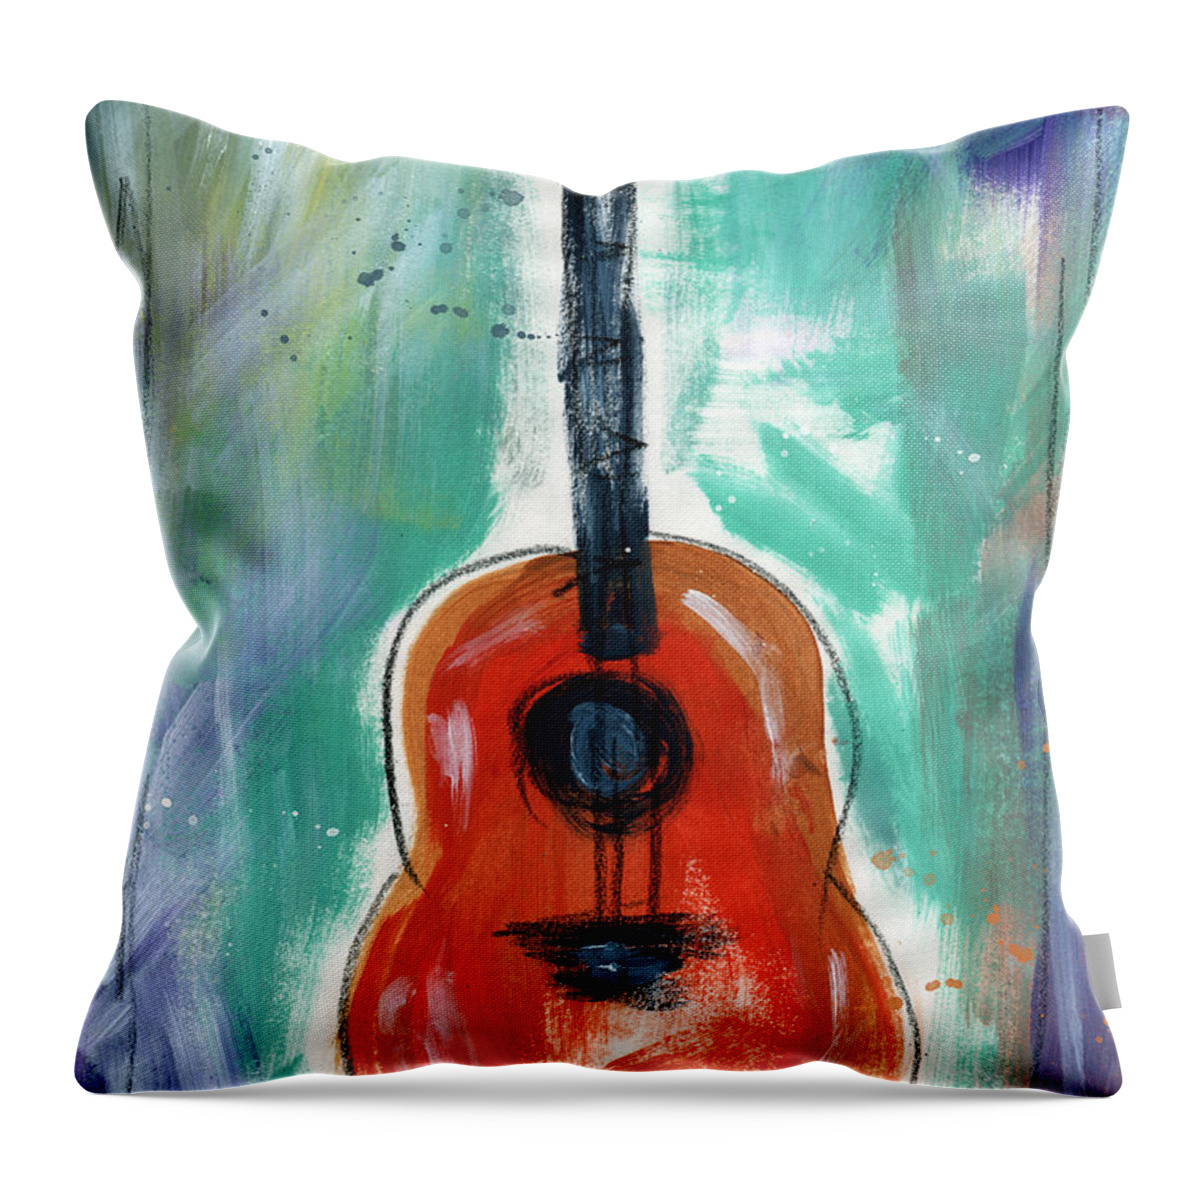 Guitar Throw Pillow featuring the painting Storyteller's Guitar by Linda Woods